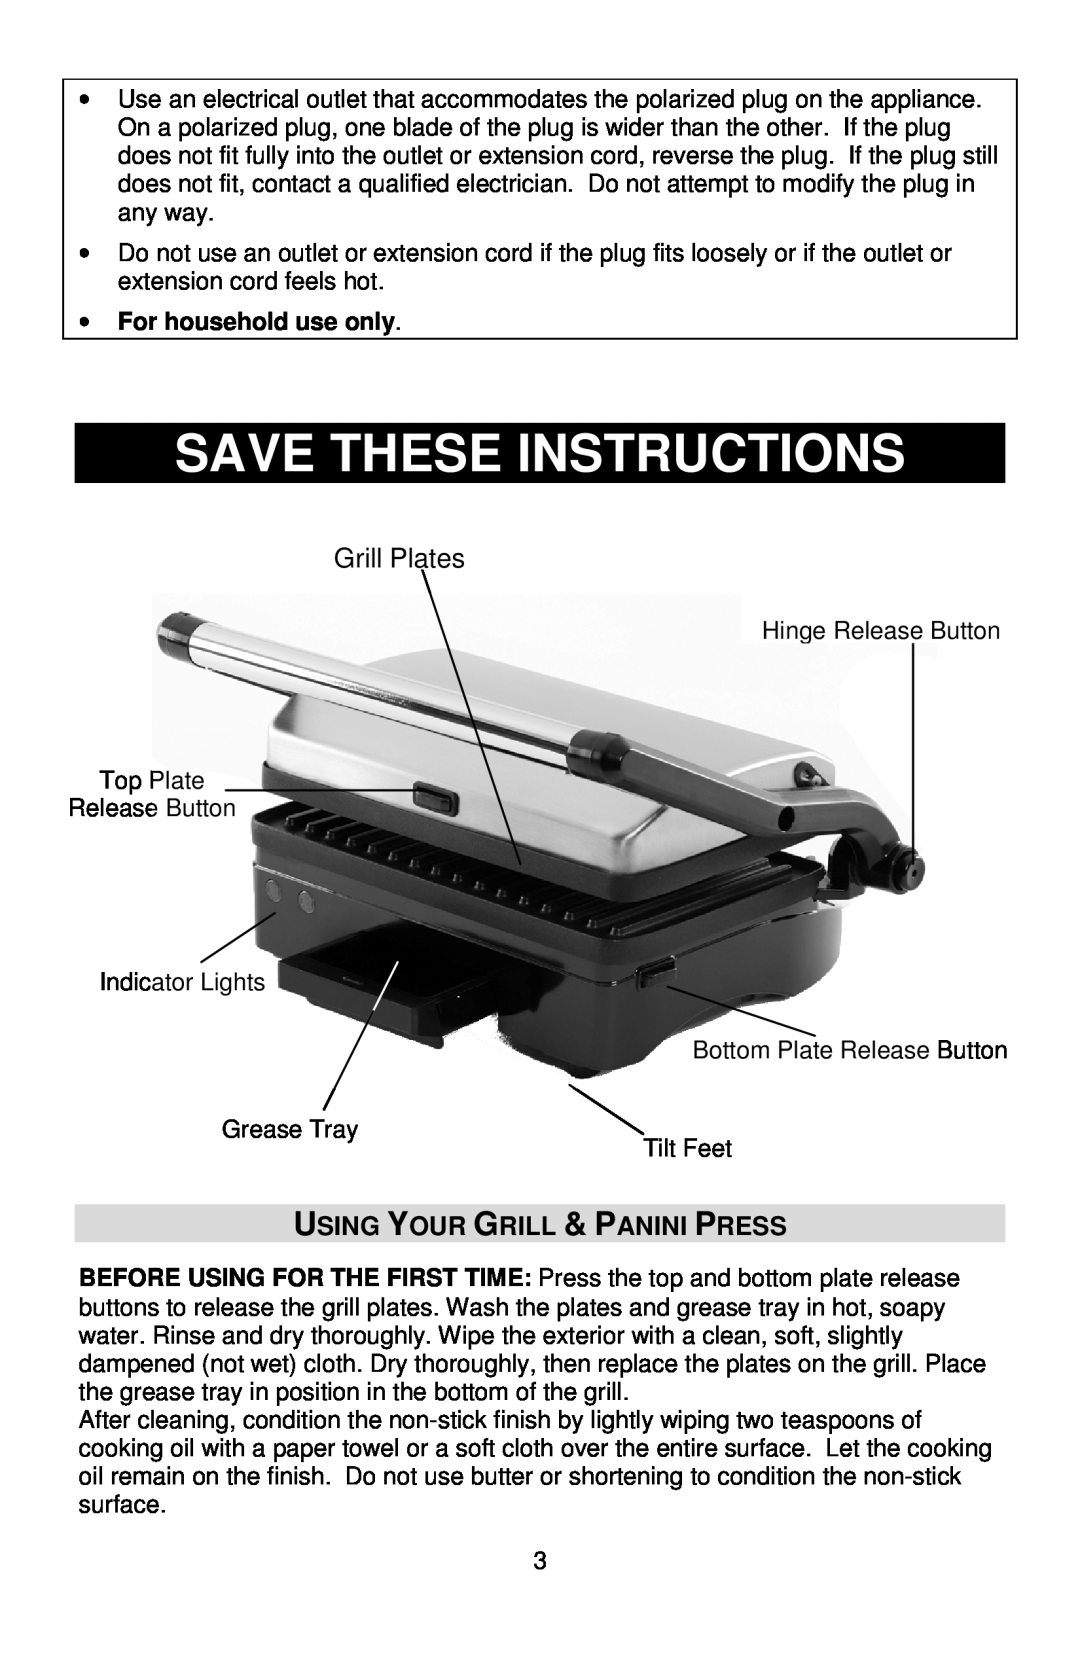 West Bend 6113, L5789 Save These Instructions, Grill Plates, Using Your Grill & Panini Press, For household use only 